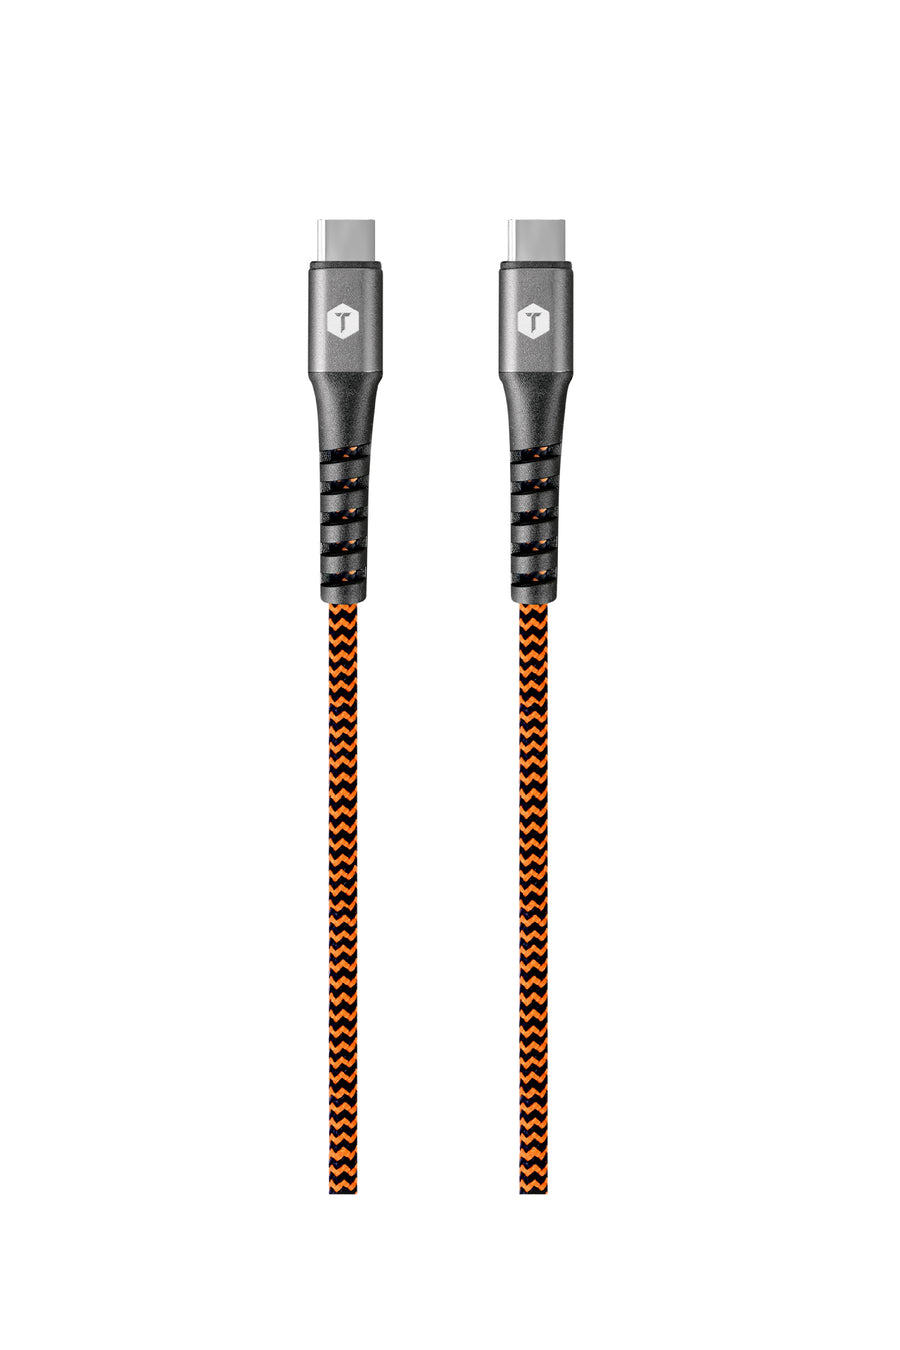 Braided 6 Ft. USB Cable with USB-C to USB-C Connector